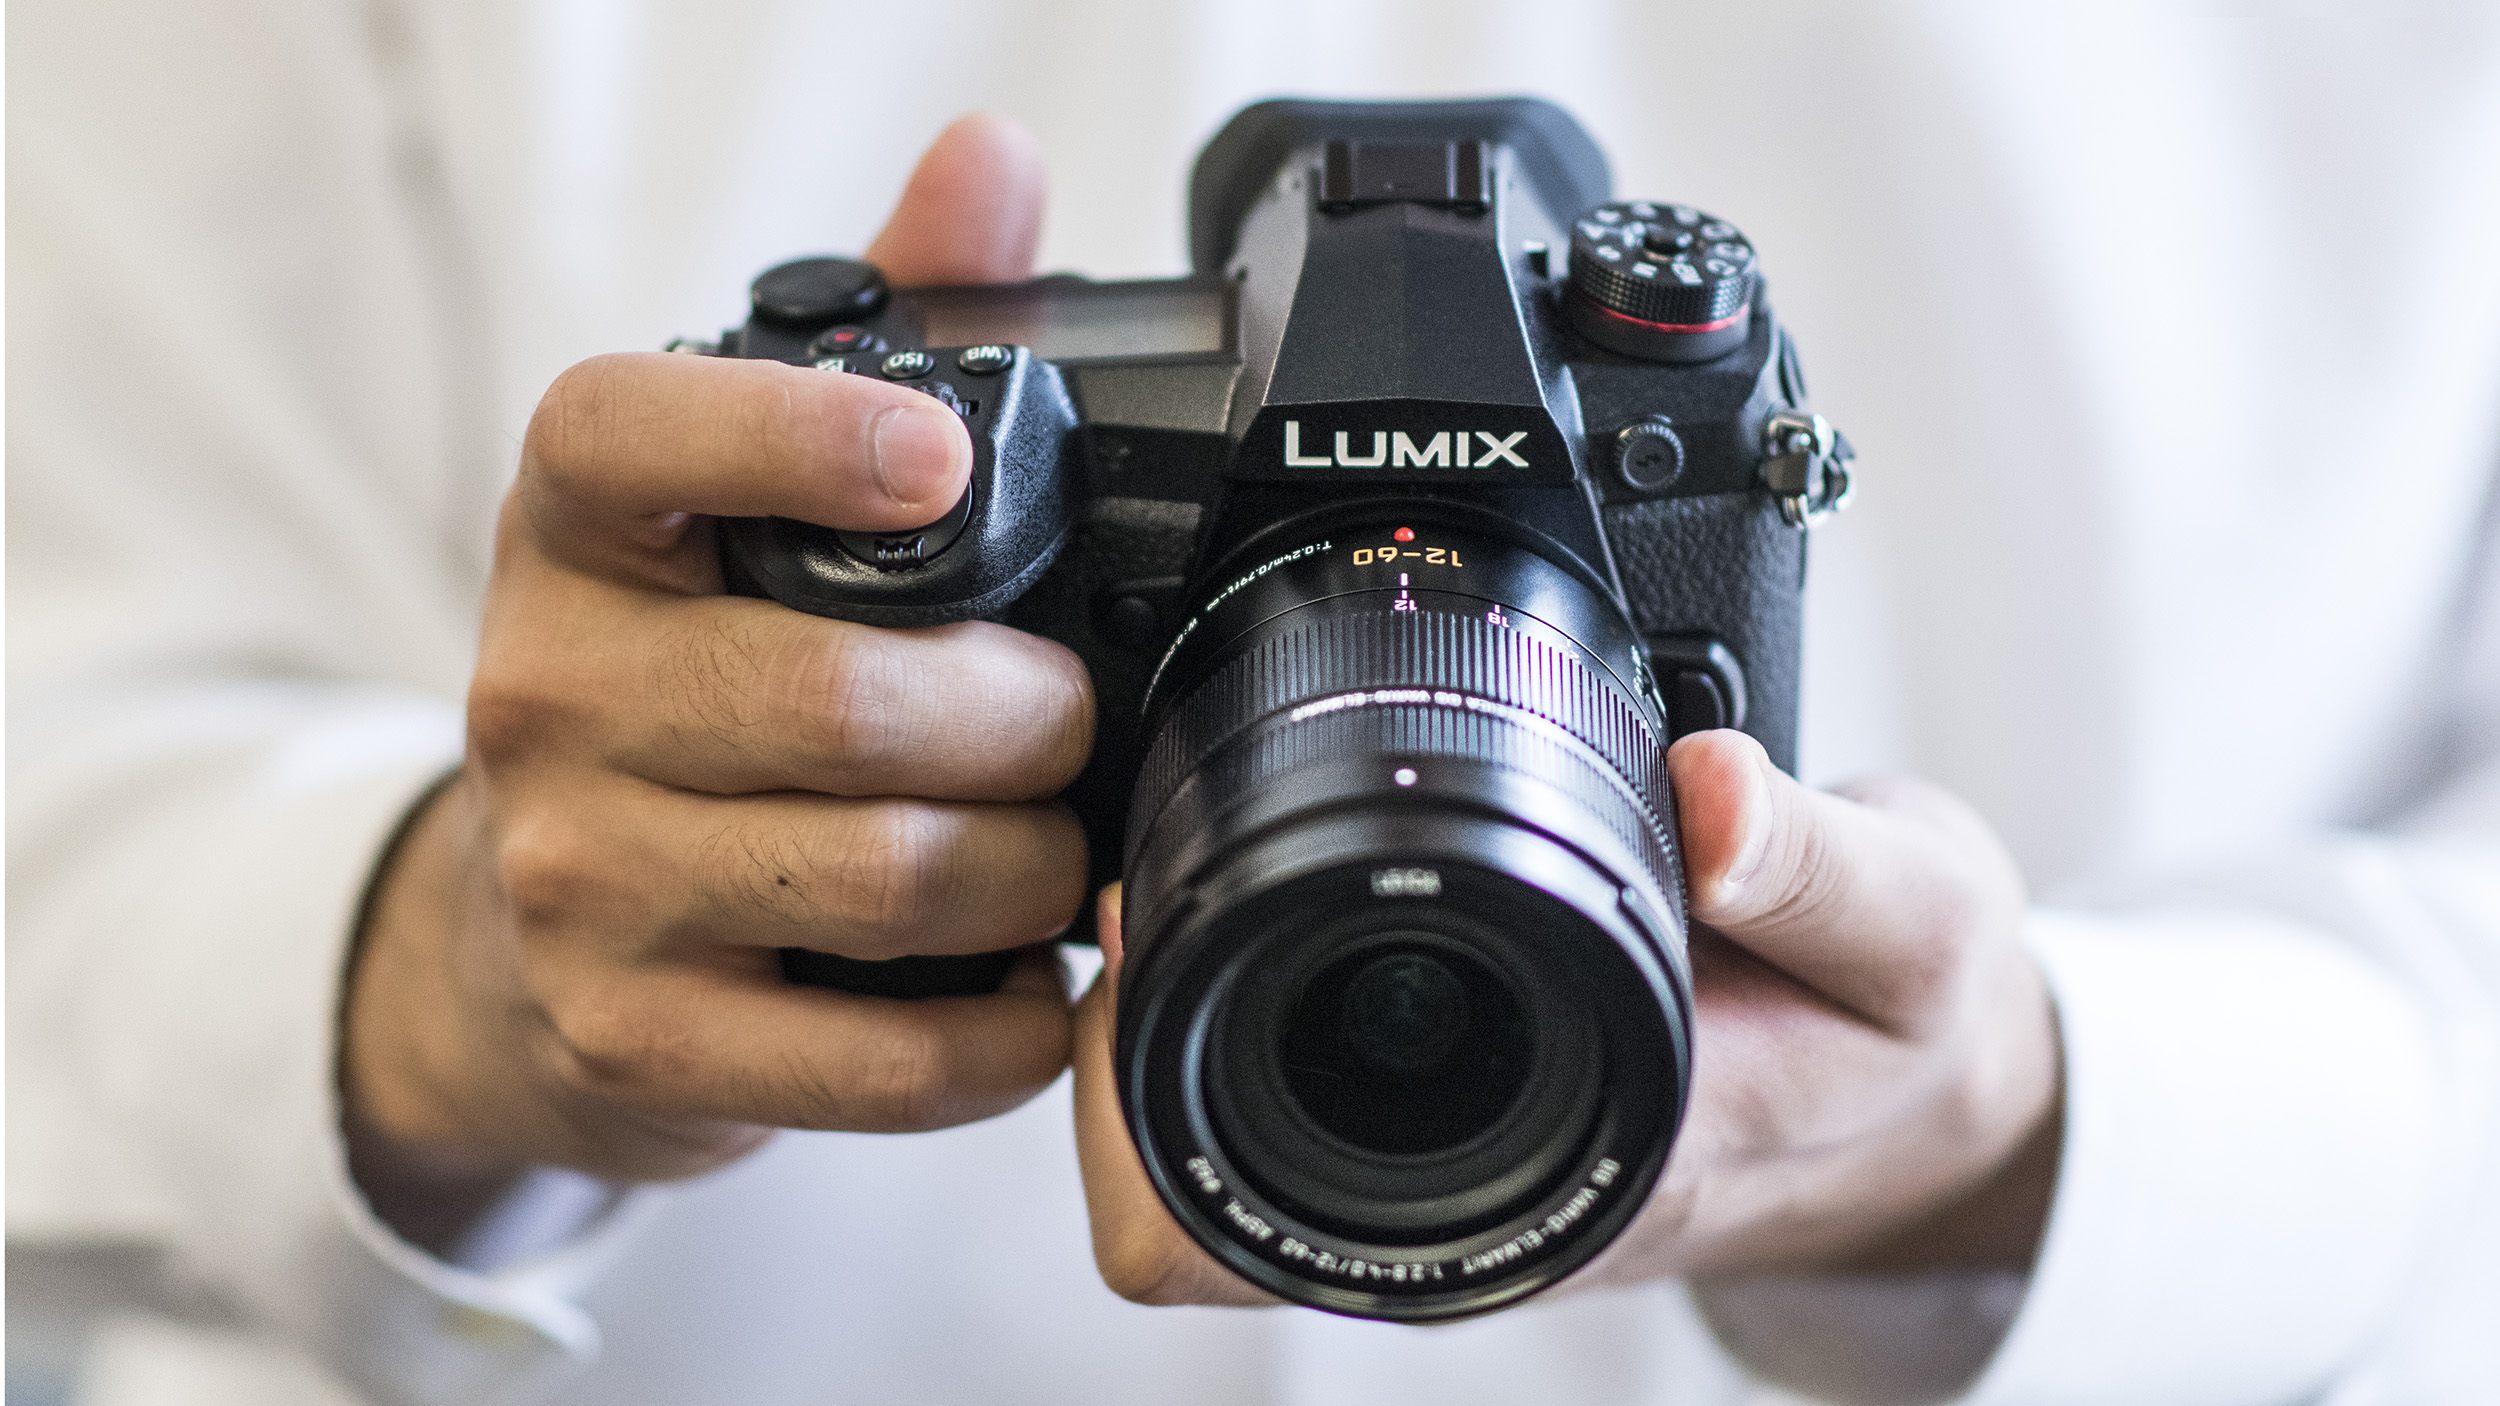 The Panasonic Lumix G9 being held with two hands